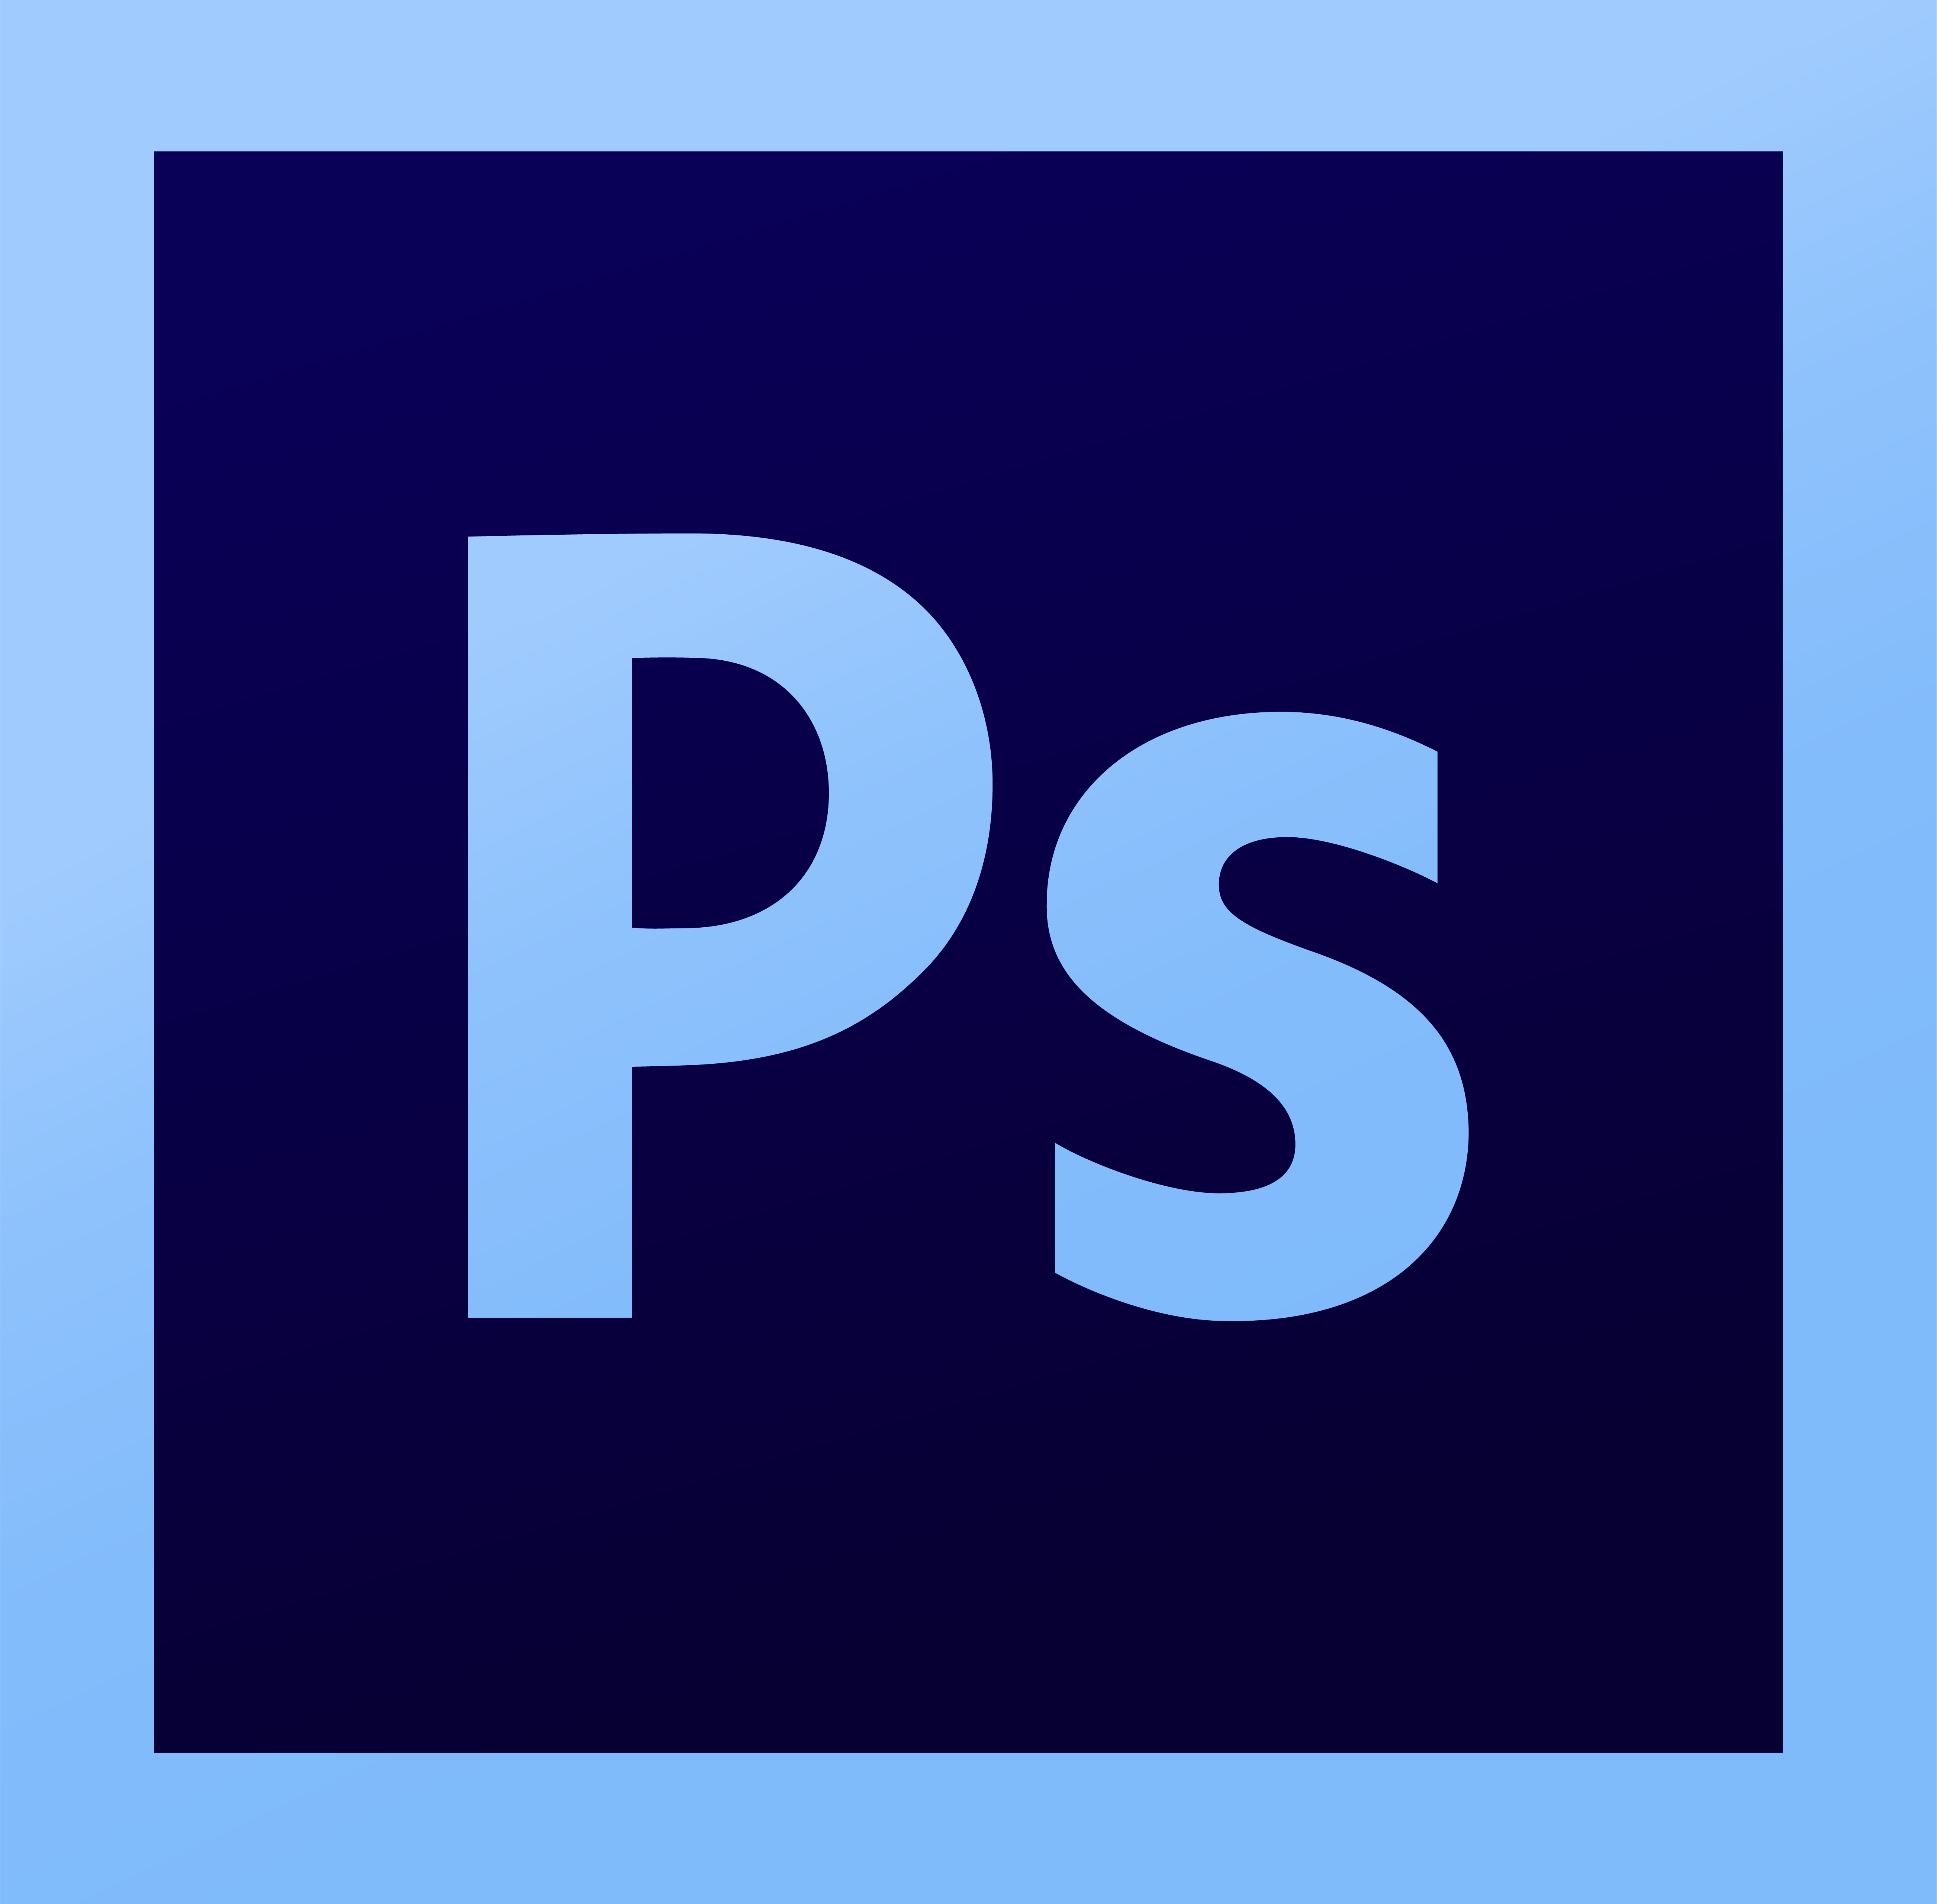 How to anonymize/blur images in Photoshop